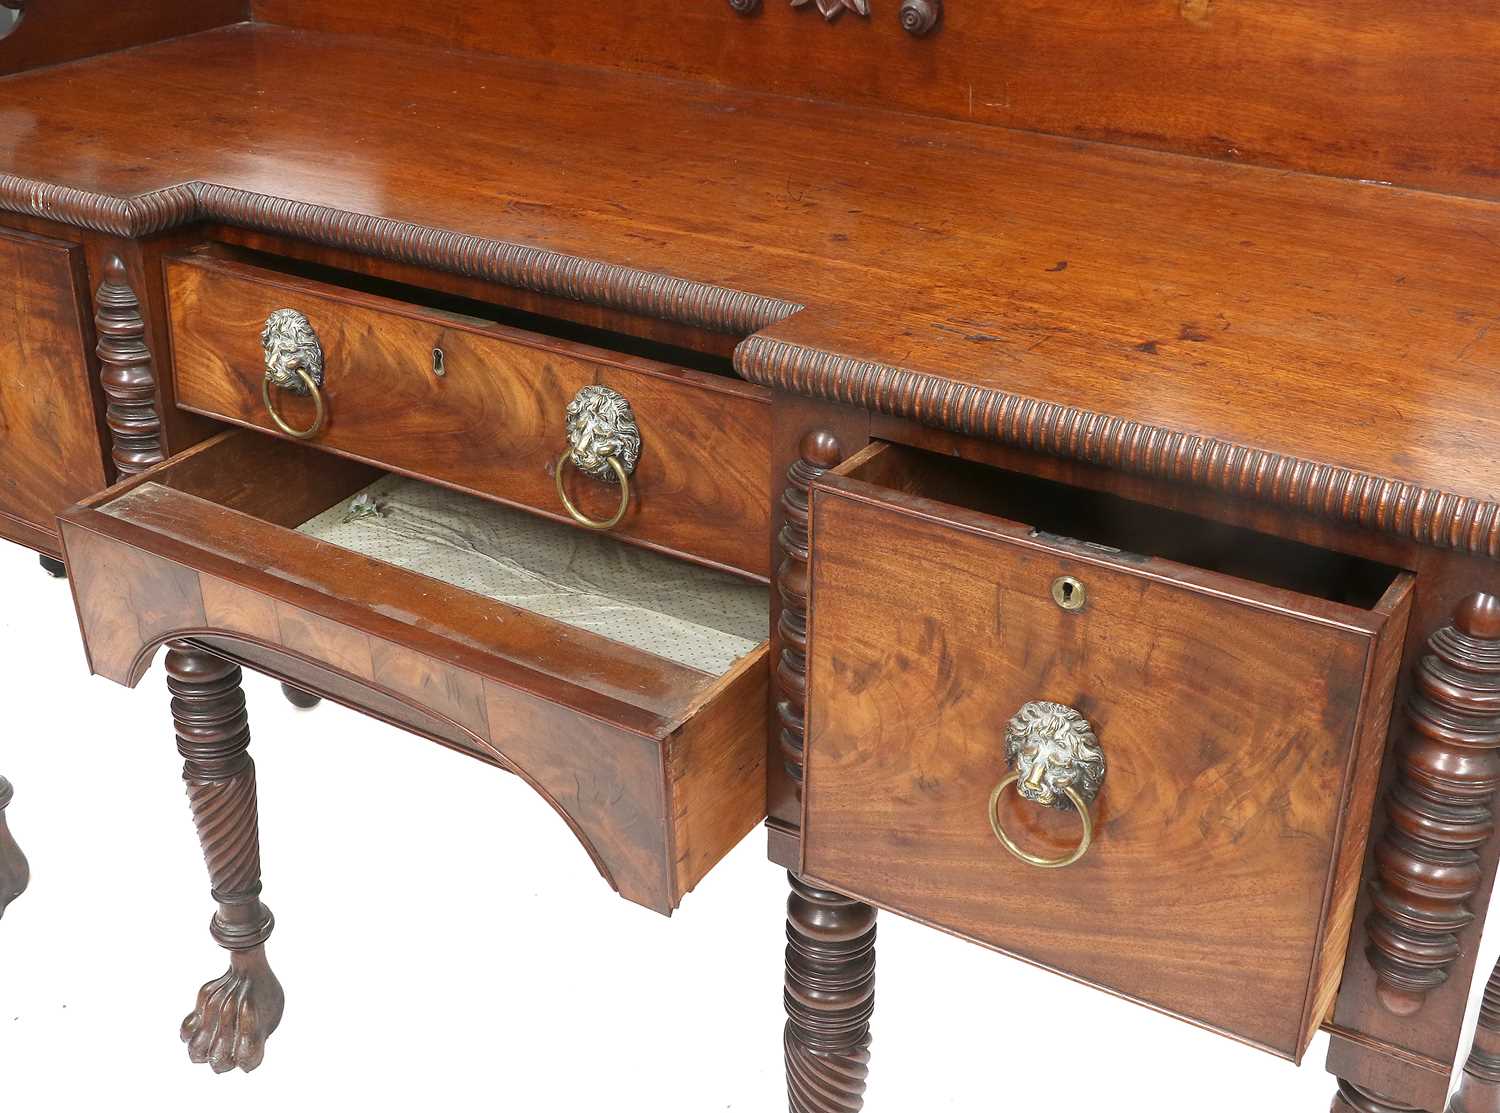 An Irish Regency Carved Mahogany Sideboard, early 19th century, with three-quarter scrolled and - Image 4 of 4